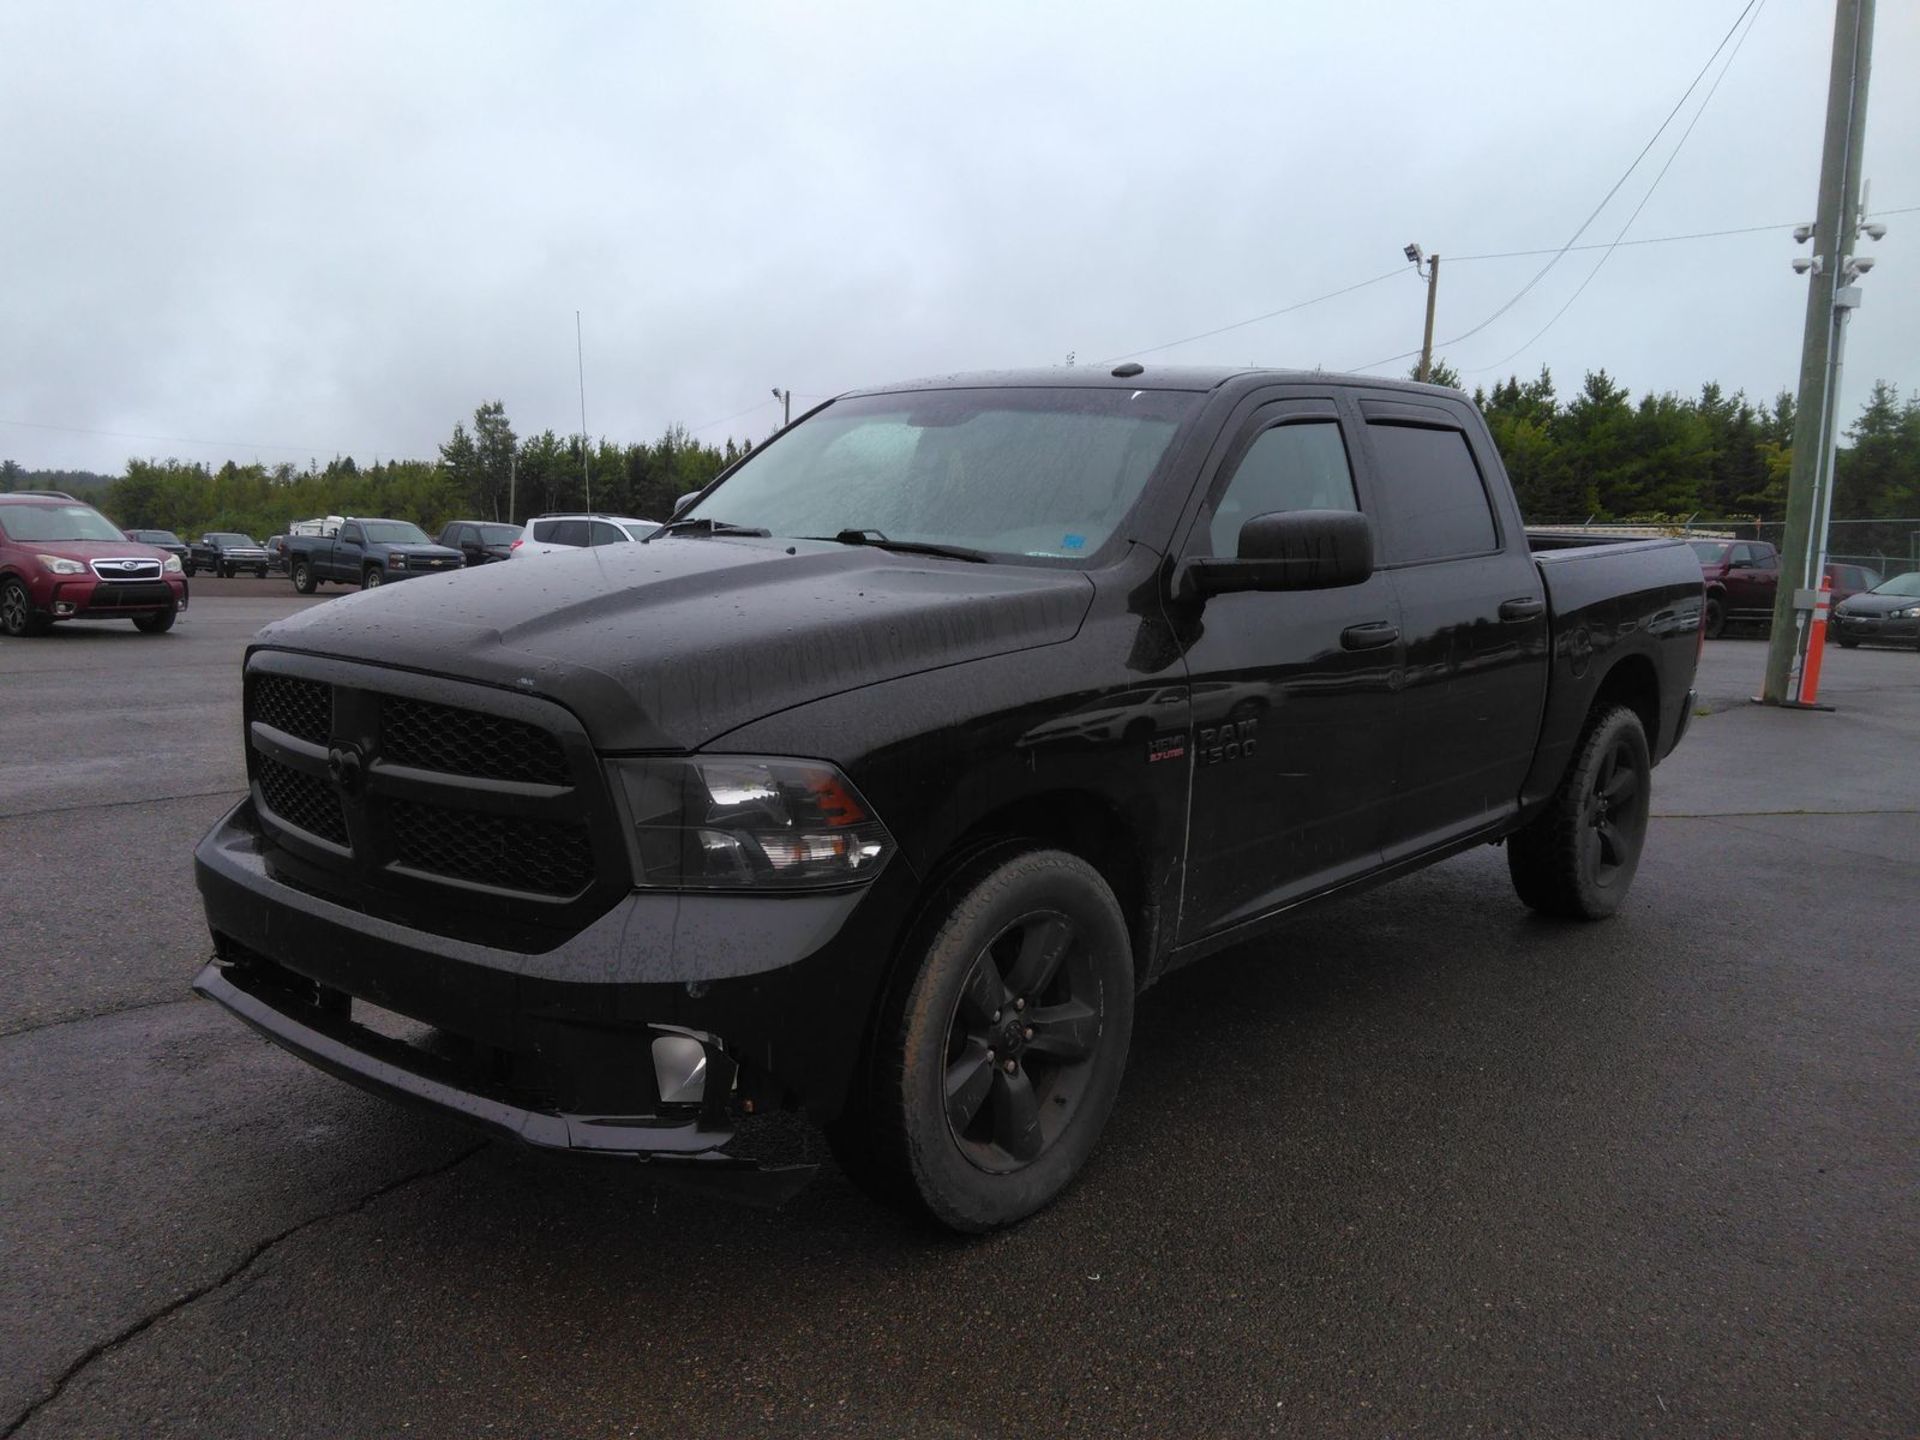 ** ON SALE ** Dodge Ram 5.7L Hemi V8 1500 Express Limited Crew Cab 4WD ''2017 Year'' - A/C - Image 2 of 10